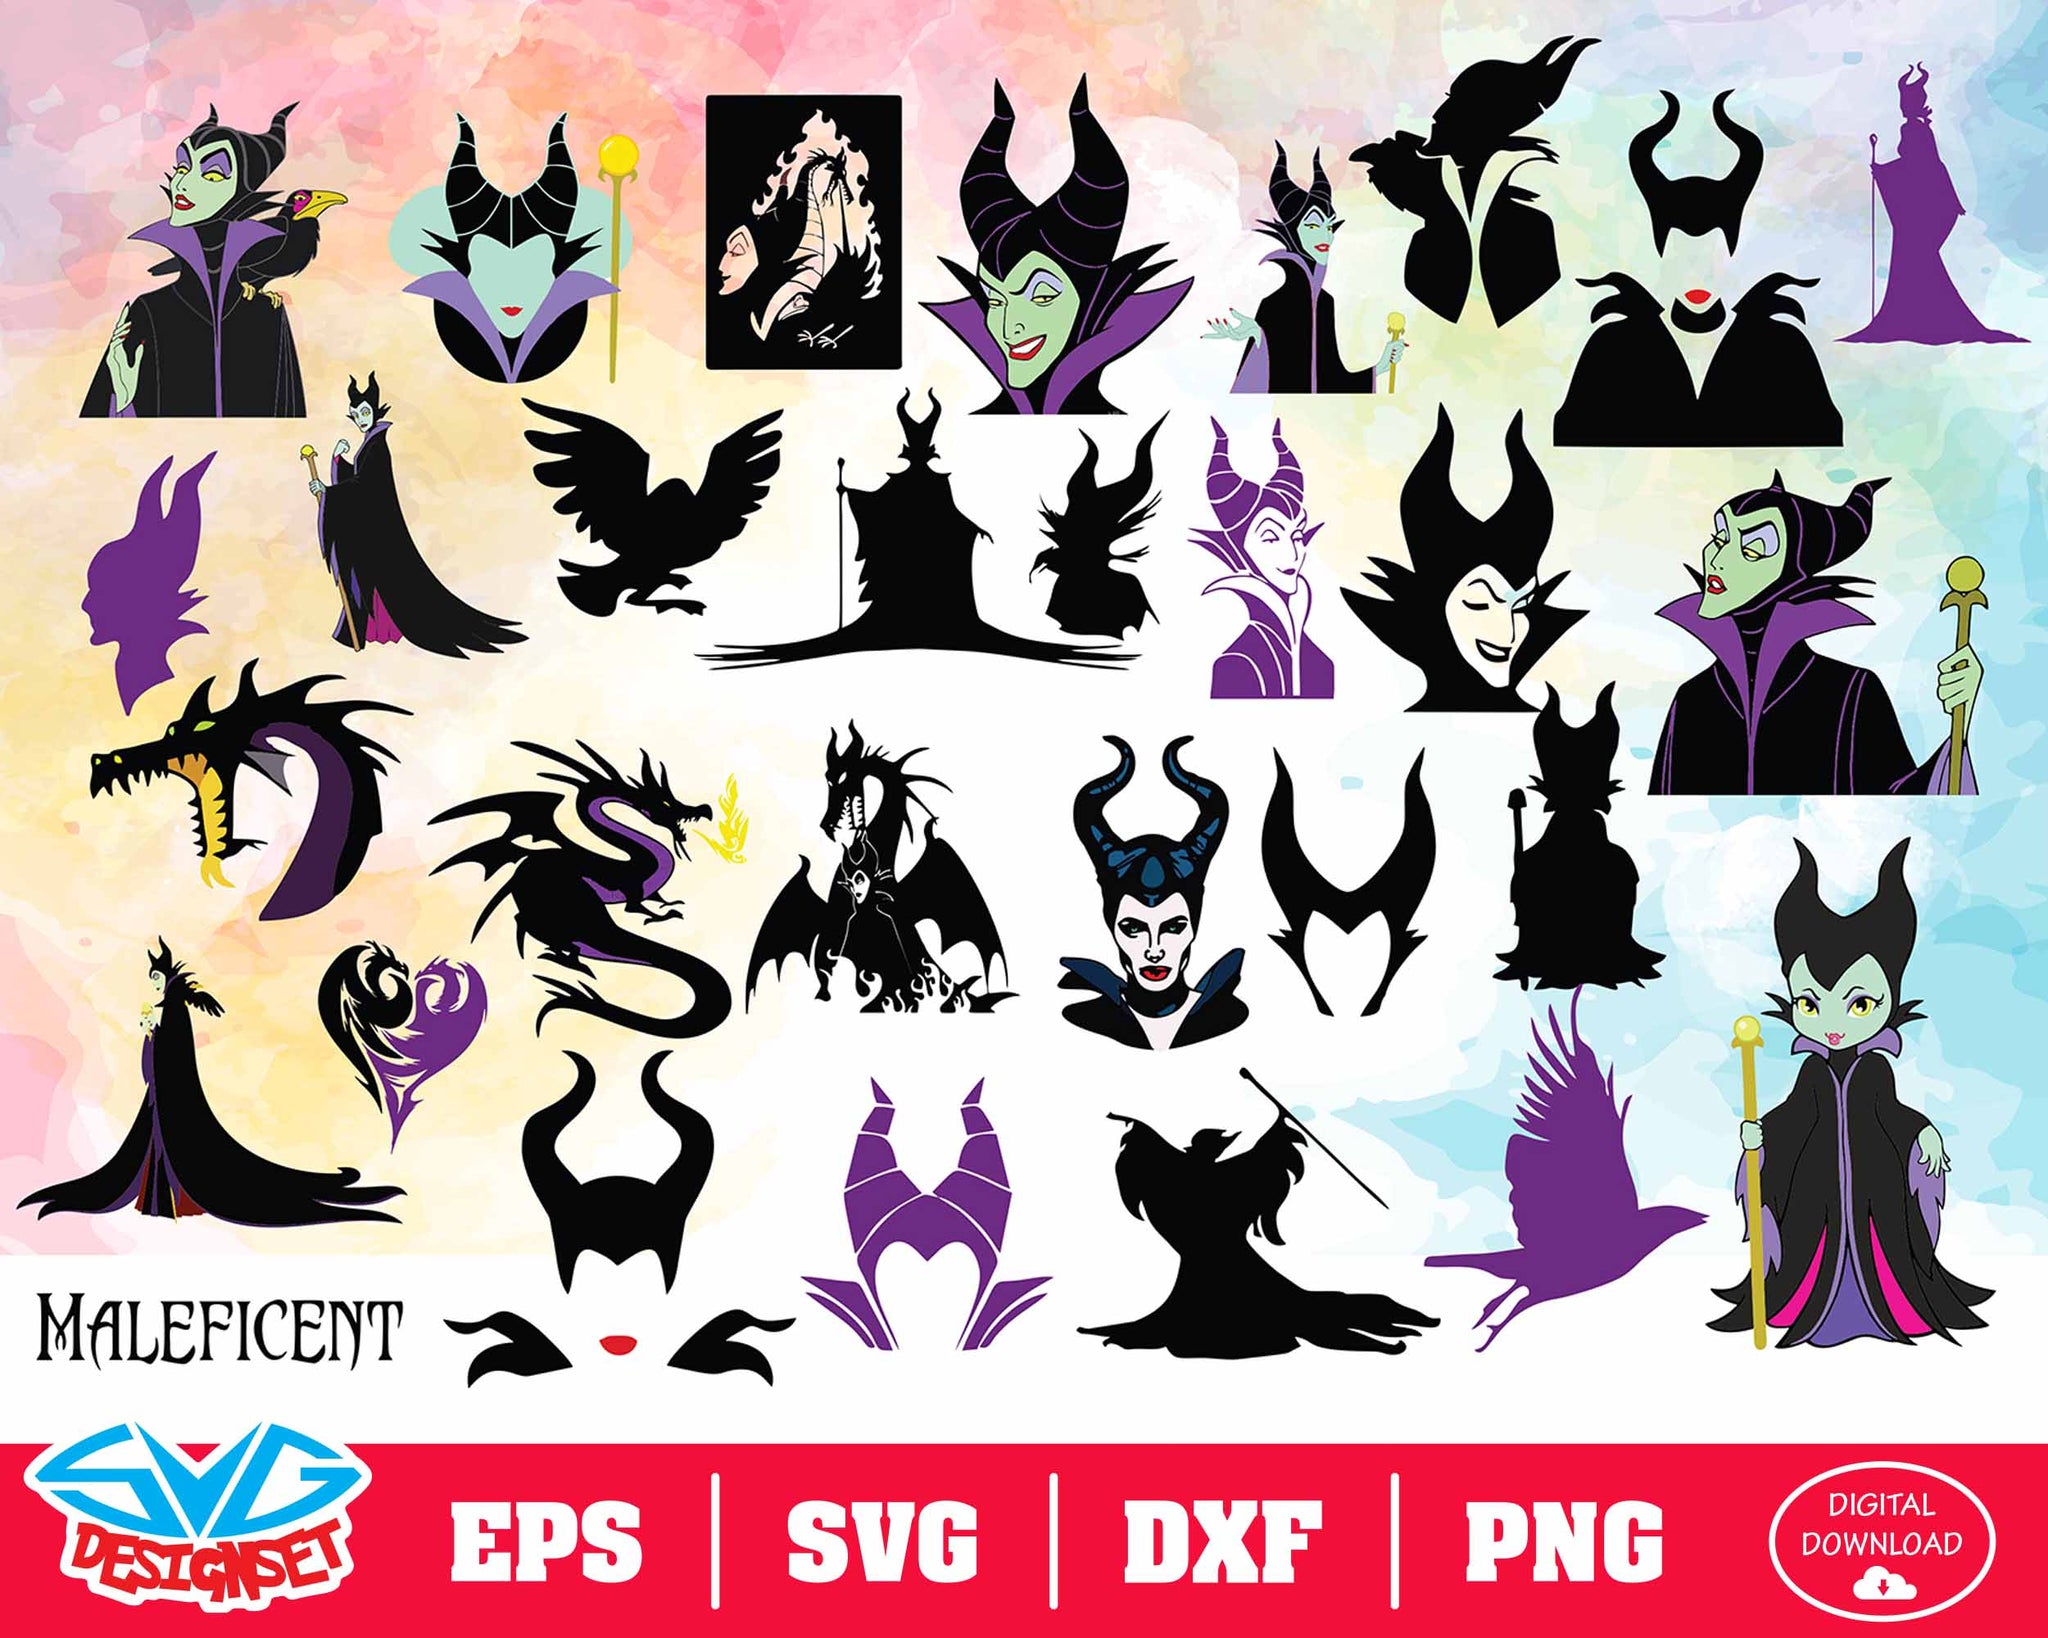 Maleficent Svg, Dxf, Eps, Png, Clipart, Silhouette and Cutfiles - SVGDesignSets